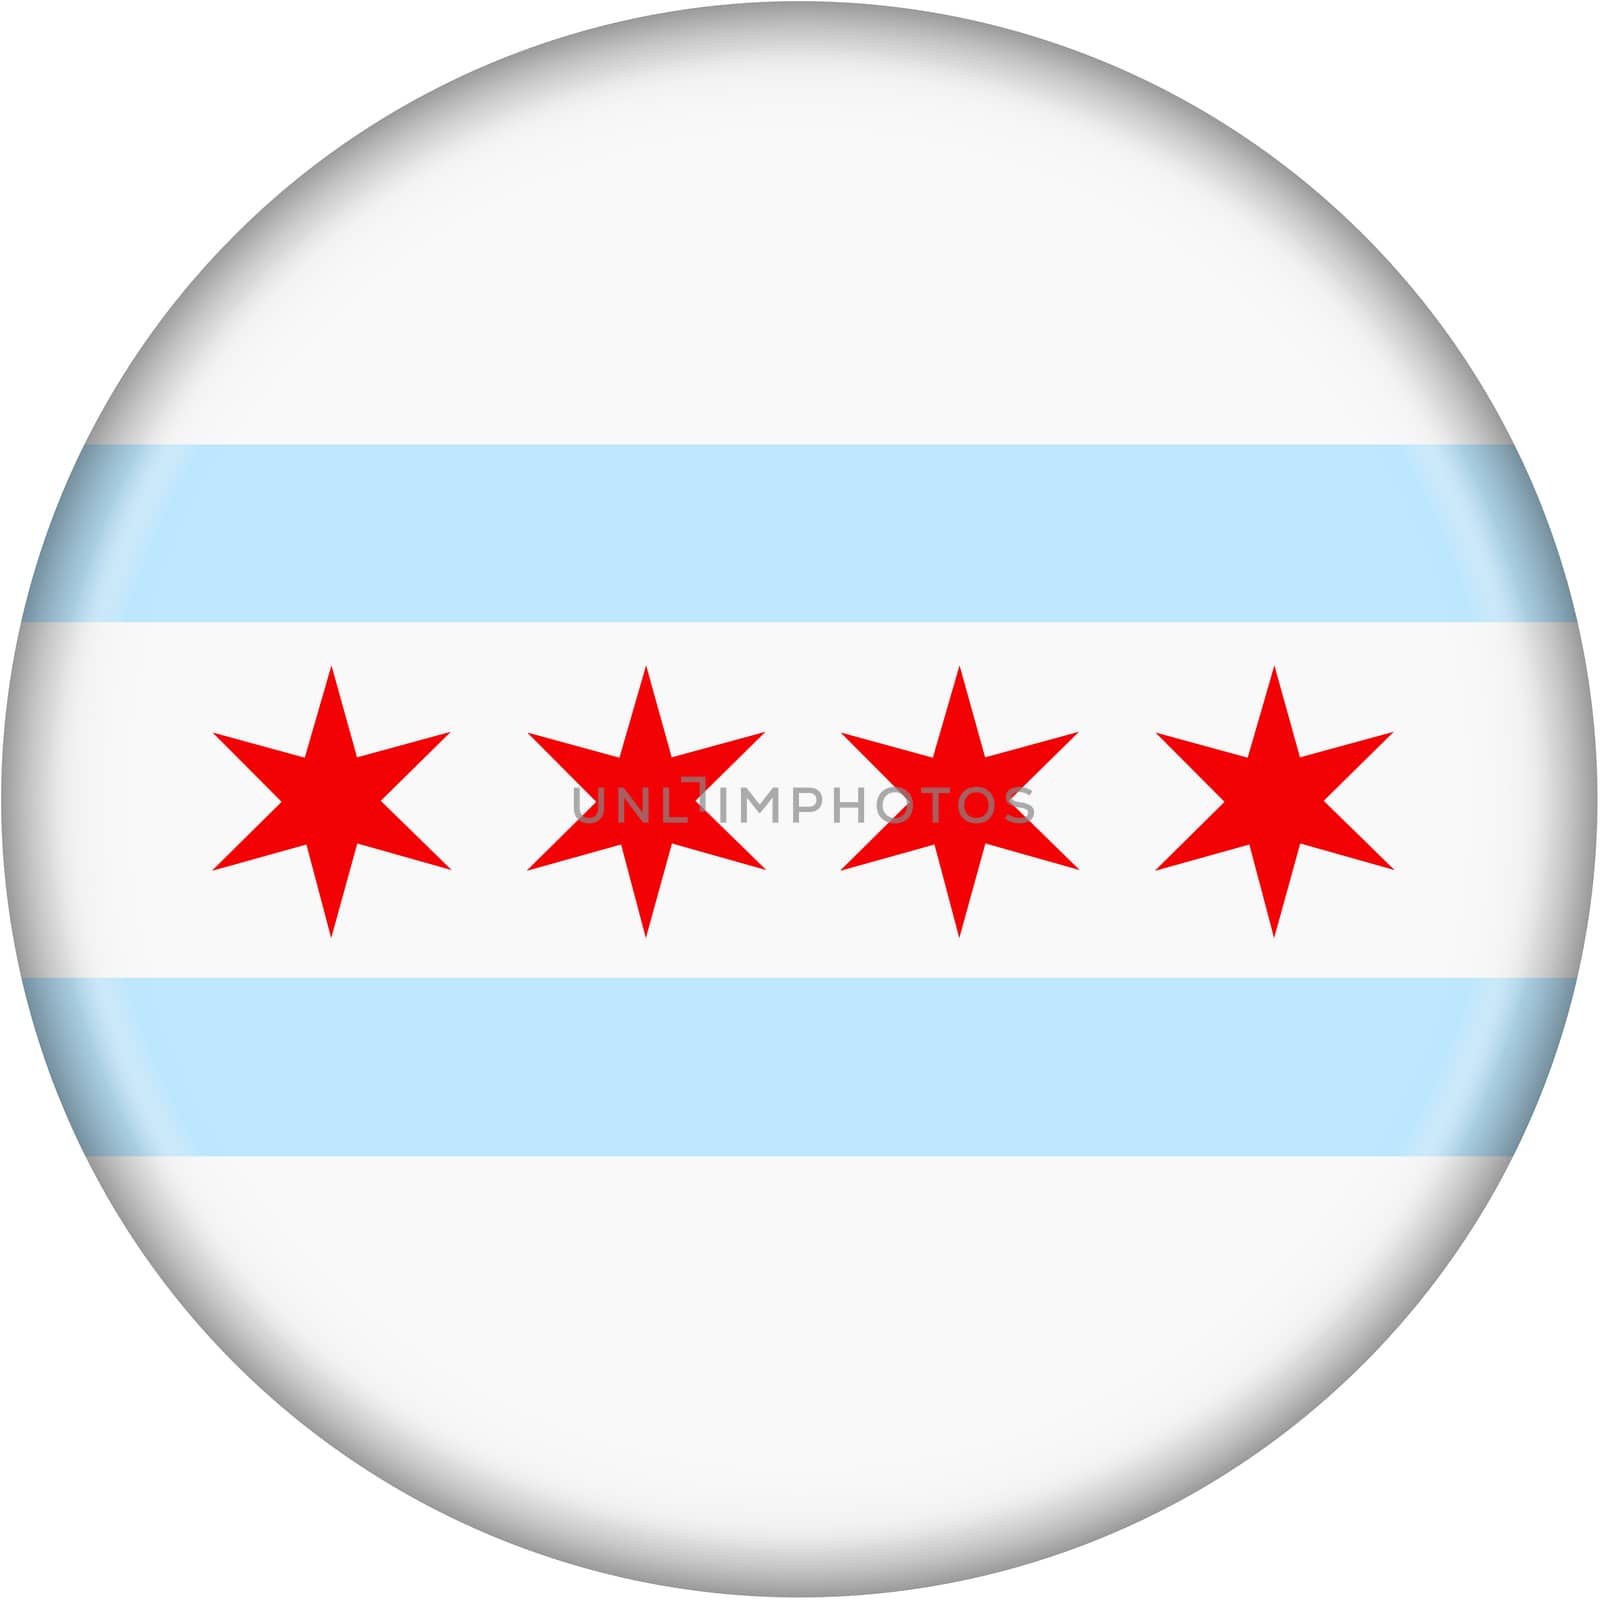 A button illustration City of Chicago flag isolated on a white background with clipping path